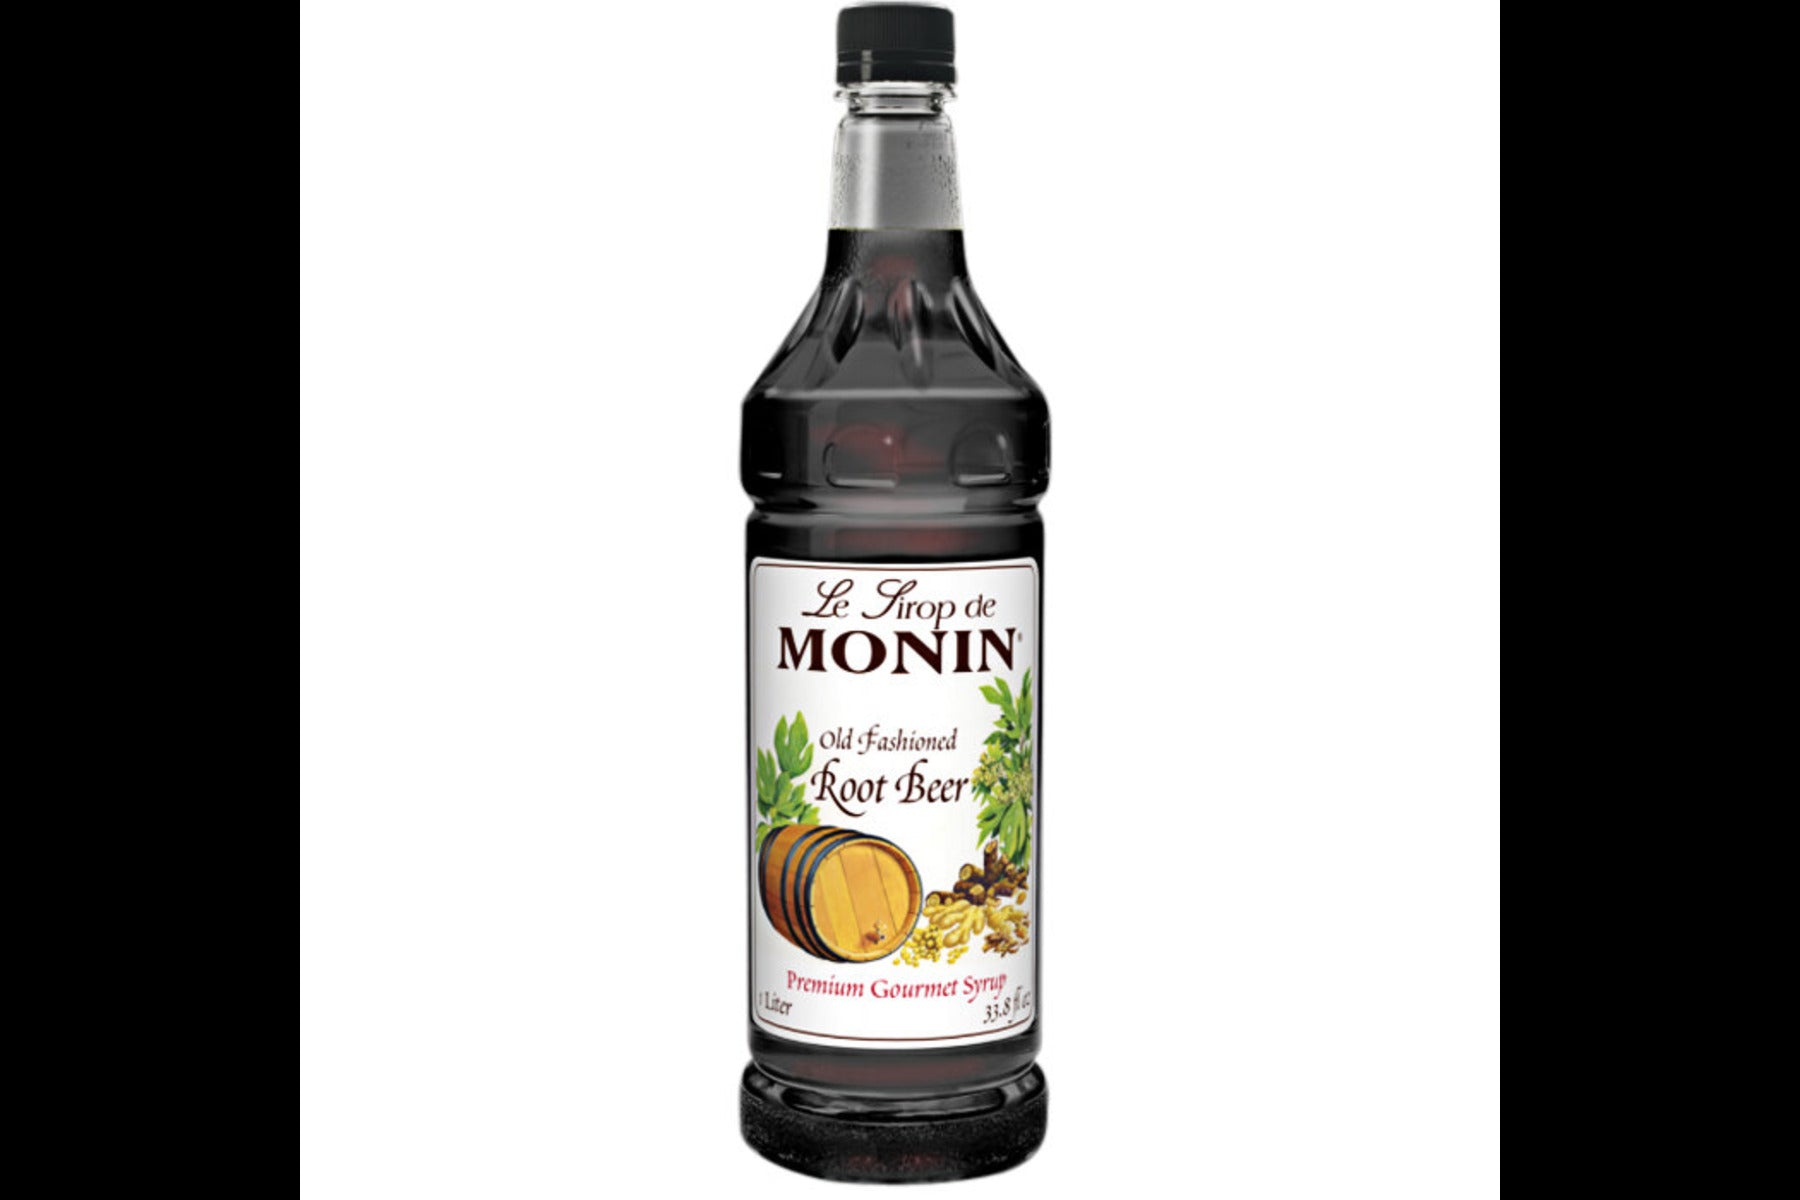 Monin Classic Syrup - 1L Plastic Bottle: Old Fashioned Root Beer